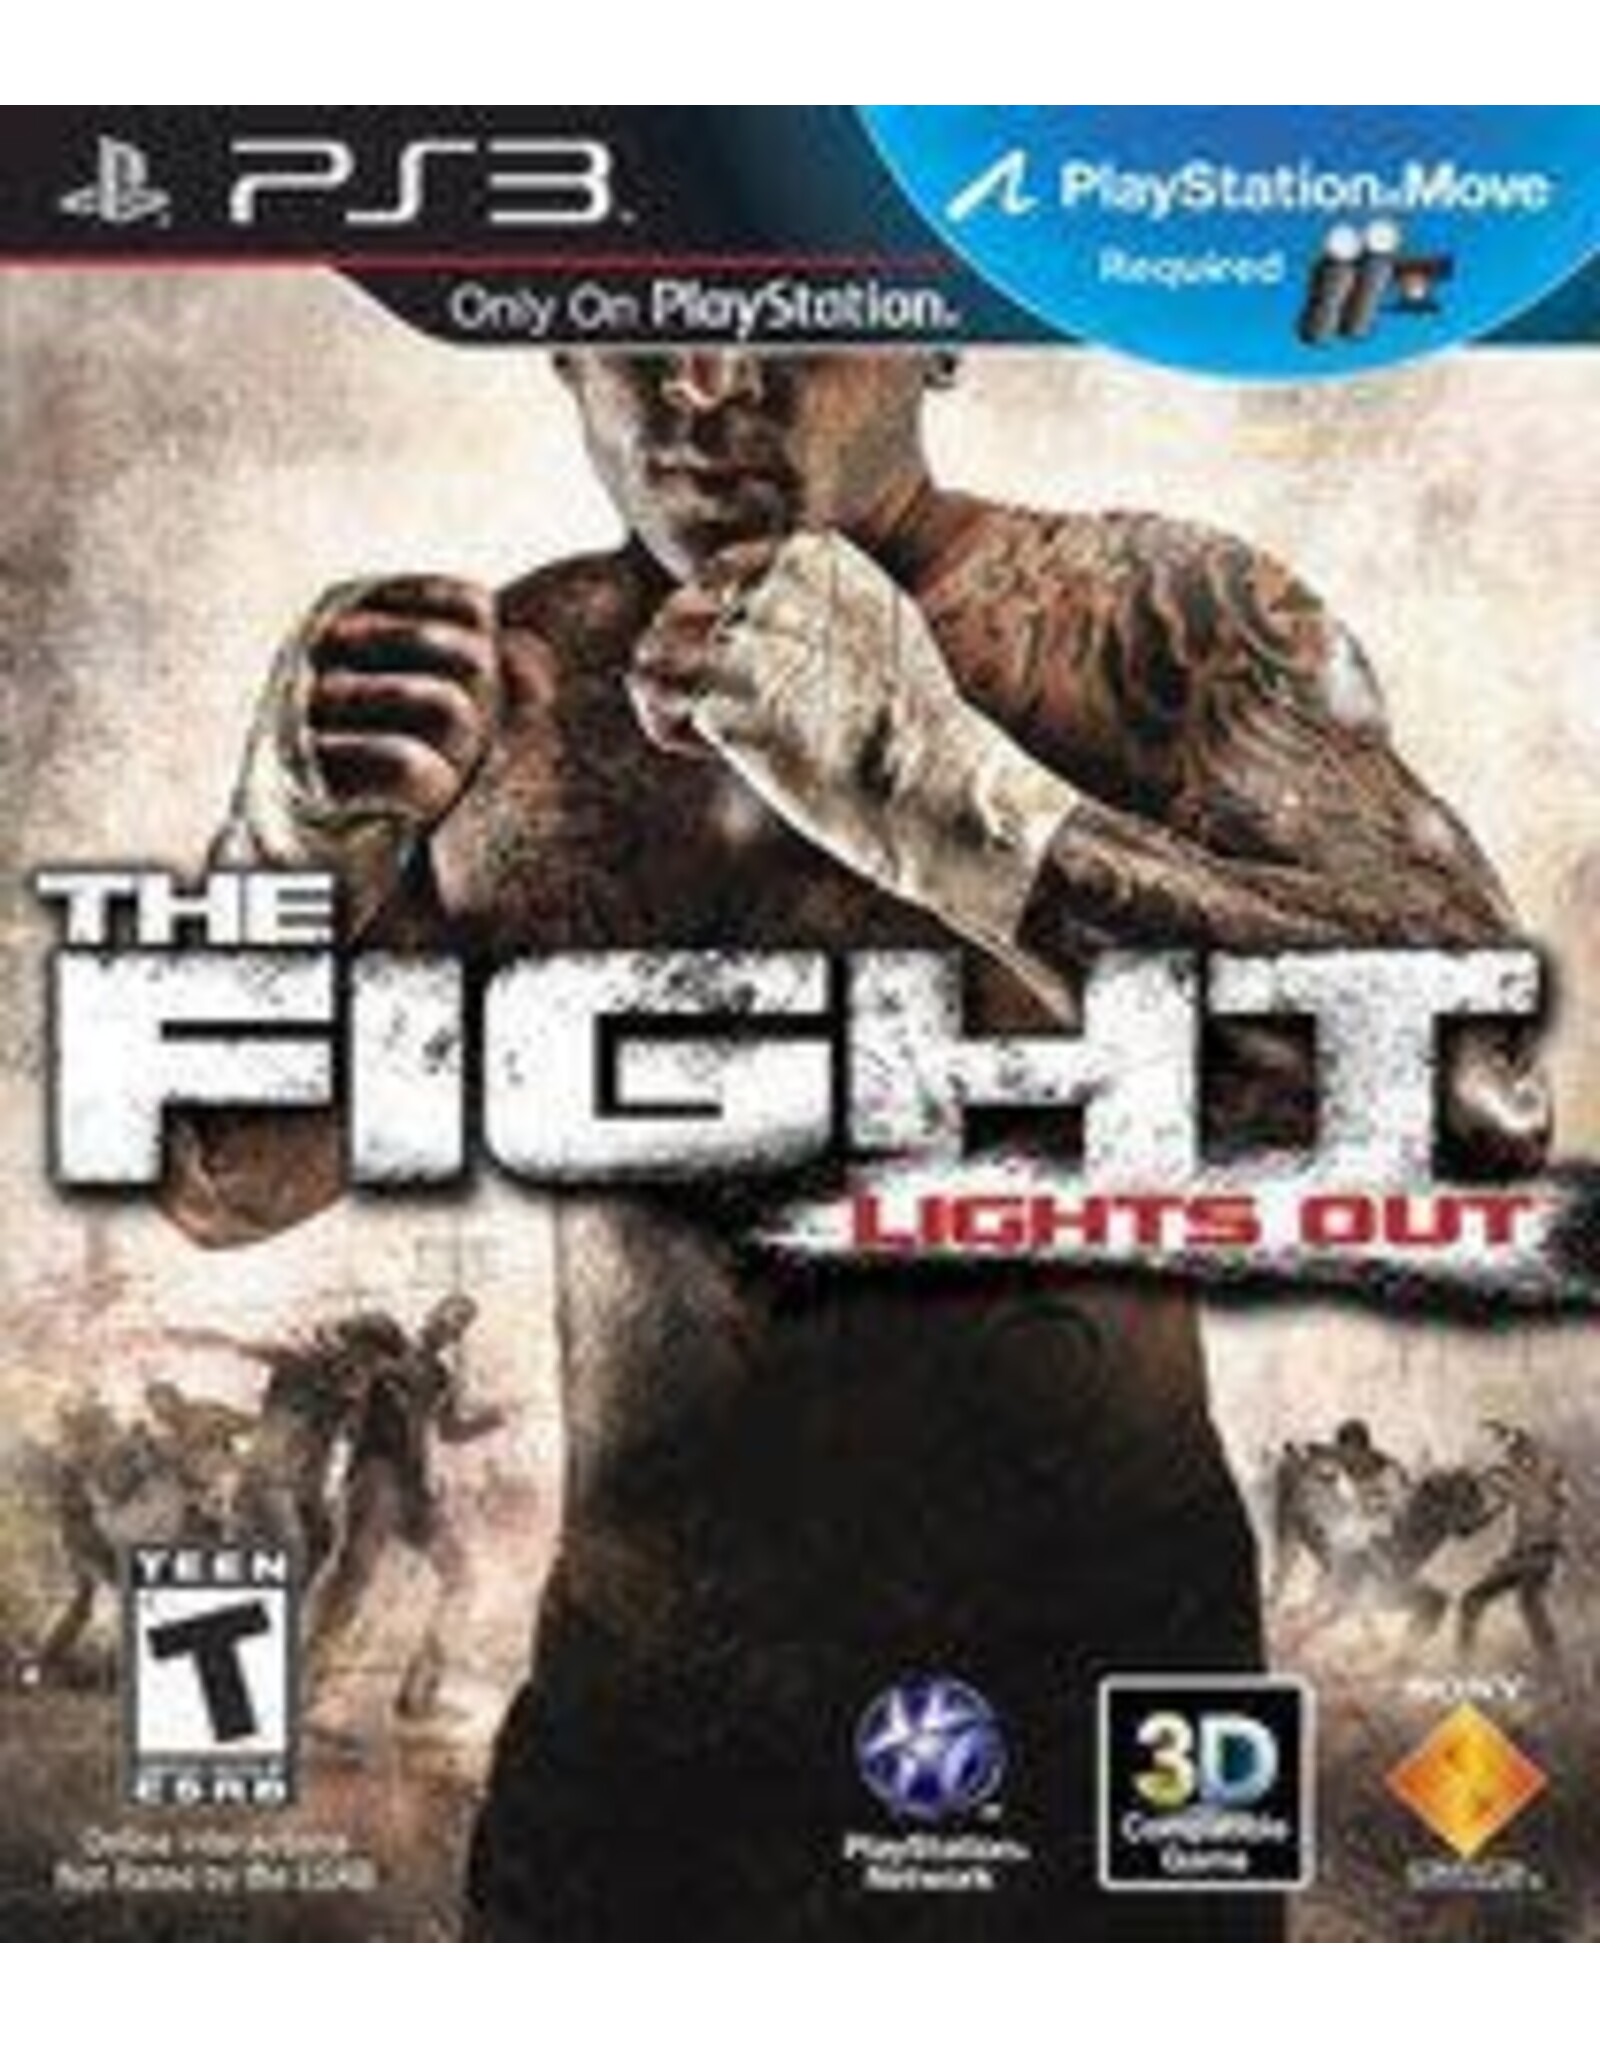 Playstation 3 The Fight: Lights Out (No Manual)